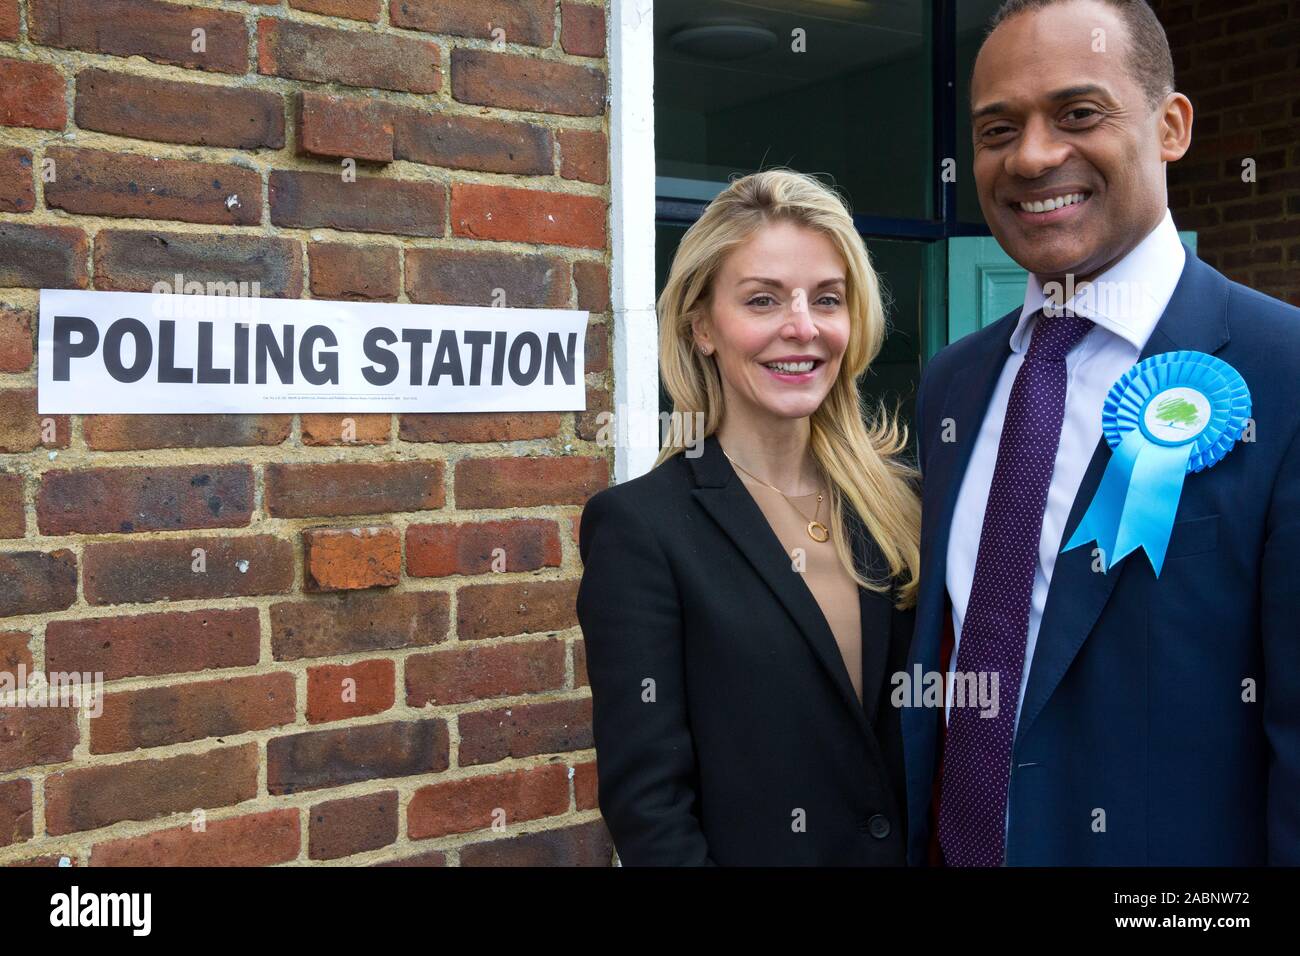 FILE IMAGE: Old Windsor, UK. 7th May, 2015. Adam Afriyie, the Conservative Party candidate for the Windsor constituency, arrives at a polling station with his wife Tracy-Jane to vote in the 2015 general election. On 27th November 2019, it was announced that Mr Afriyie, who has been Windsor's MP since 2005 and who is standing as the Conservative Party candidate in the 2019 general election, is facing bankruptcy proceedings in the High Court. Credit: Mark Kerrison/Alamy Live News Stock Photo